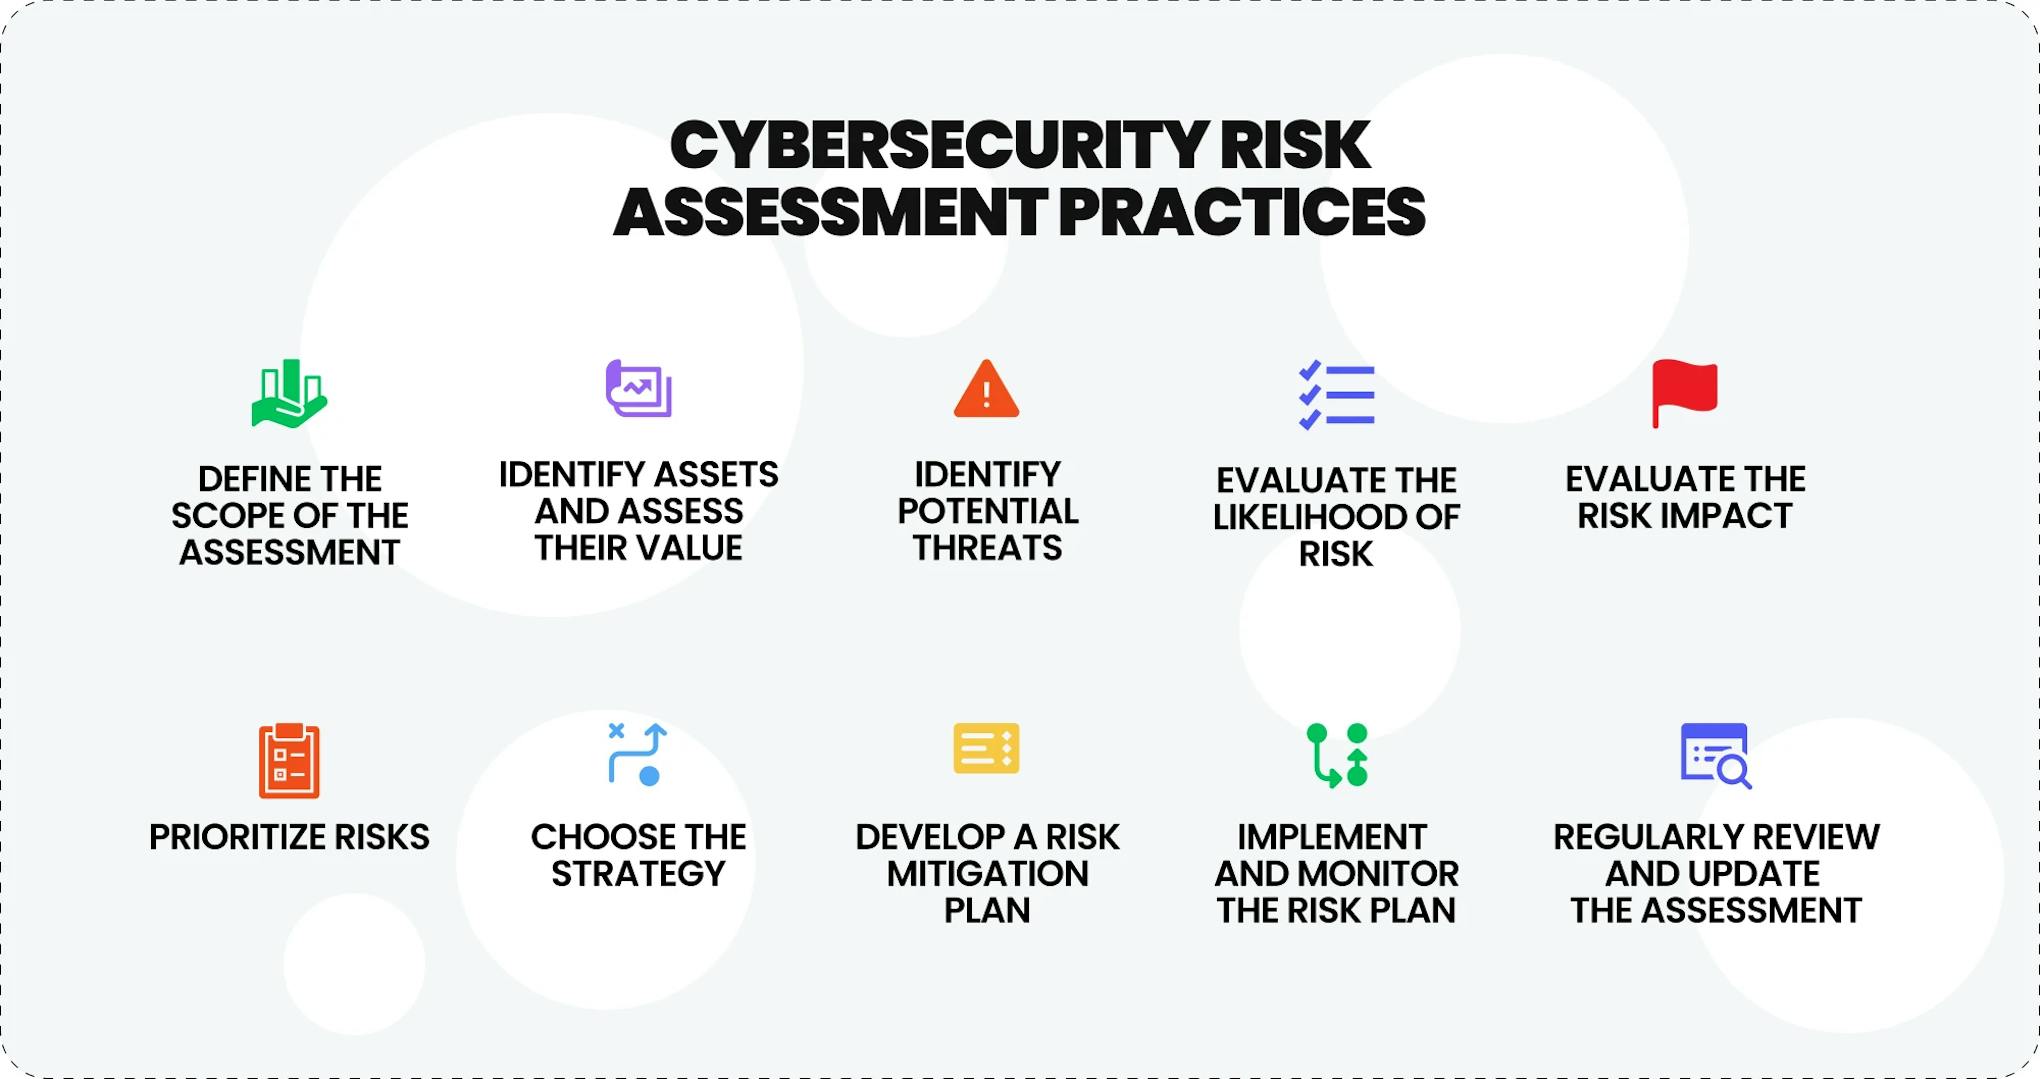 Cyberesecurity risk assessment practices